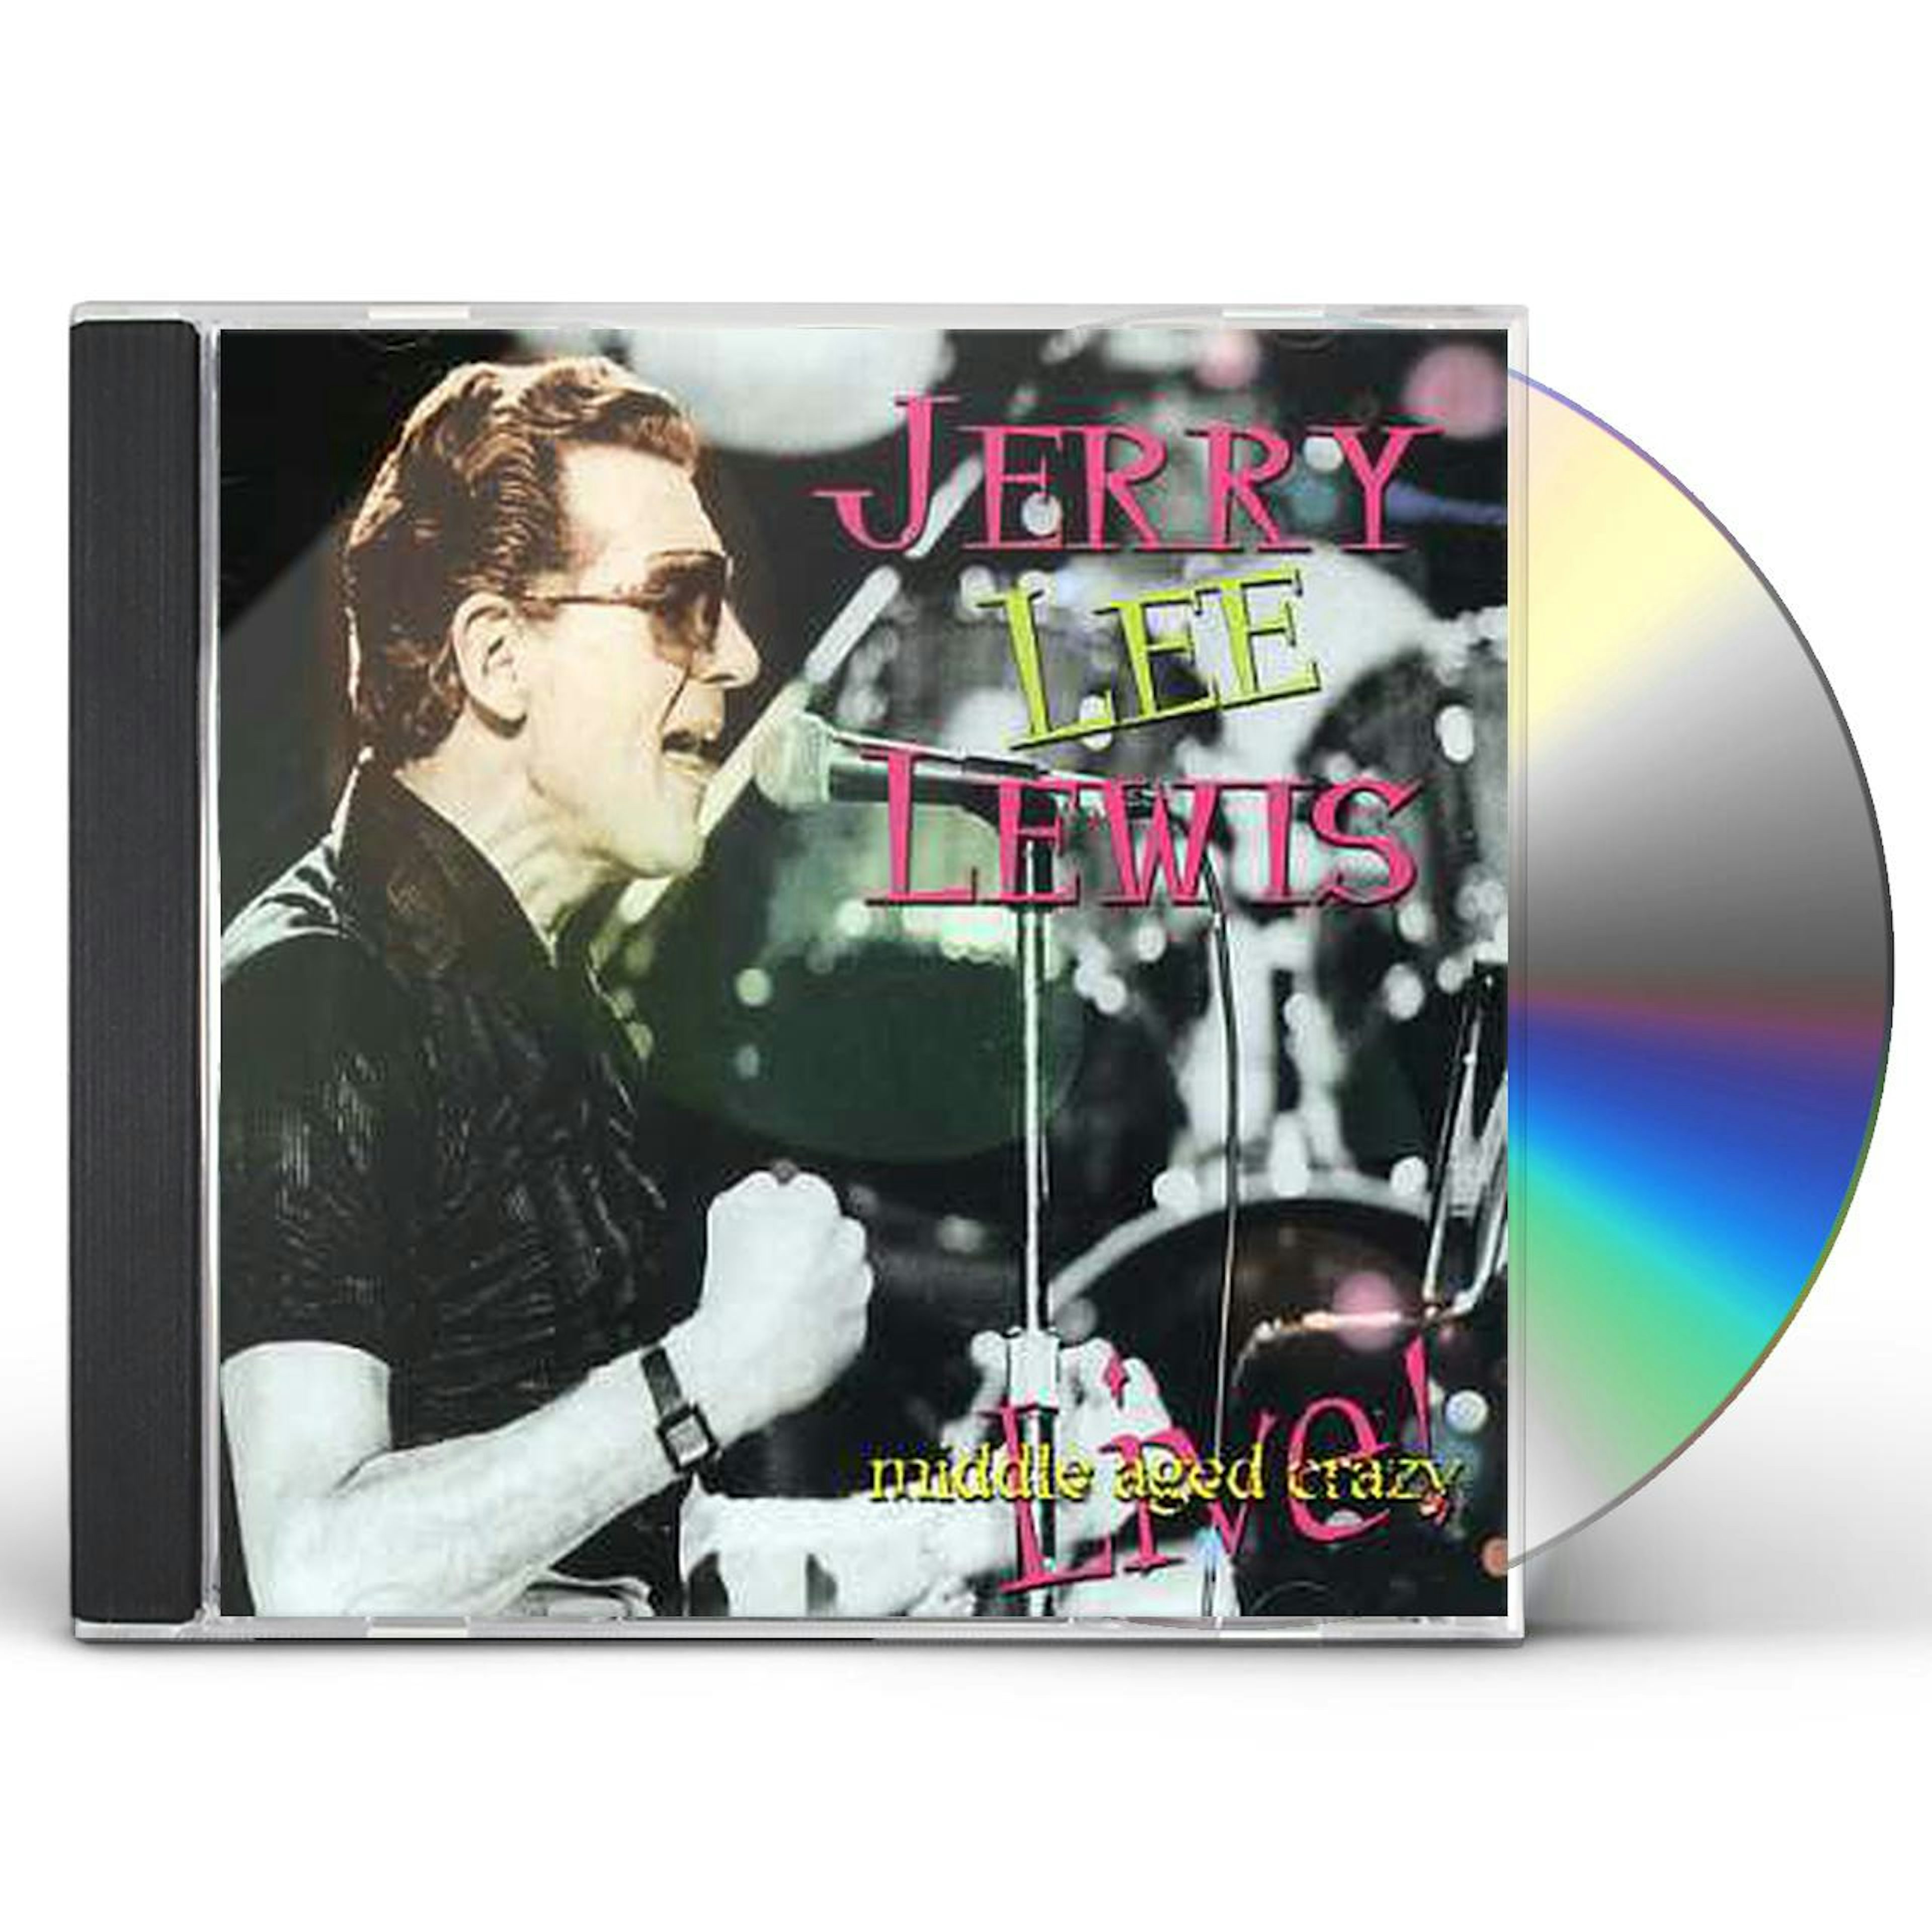 Jerry Lee Lewis MIDDLE AGED CRAZY CD